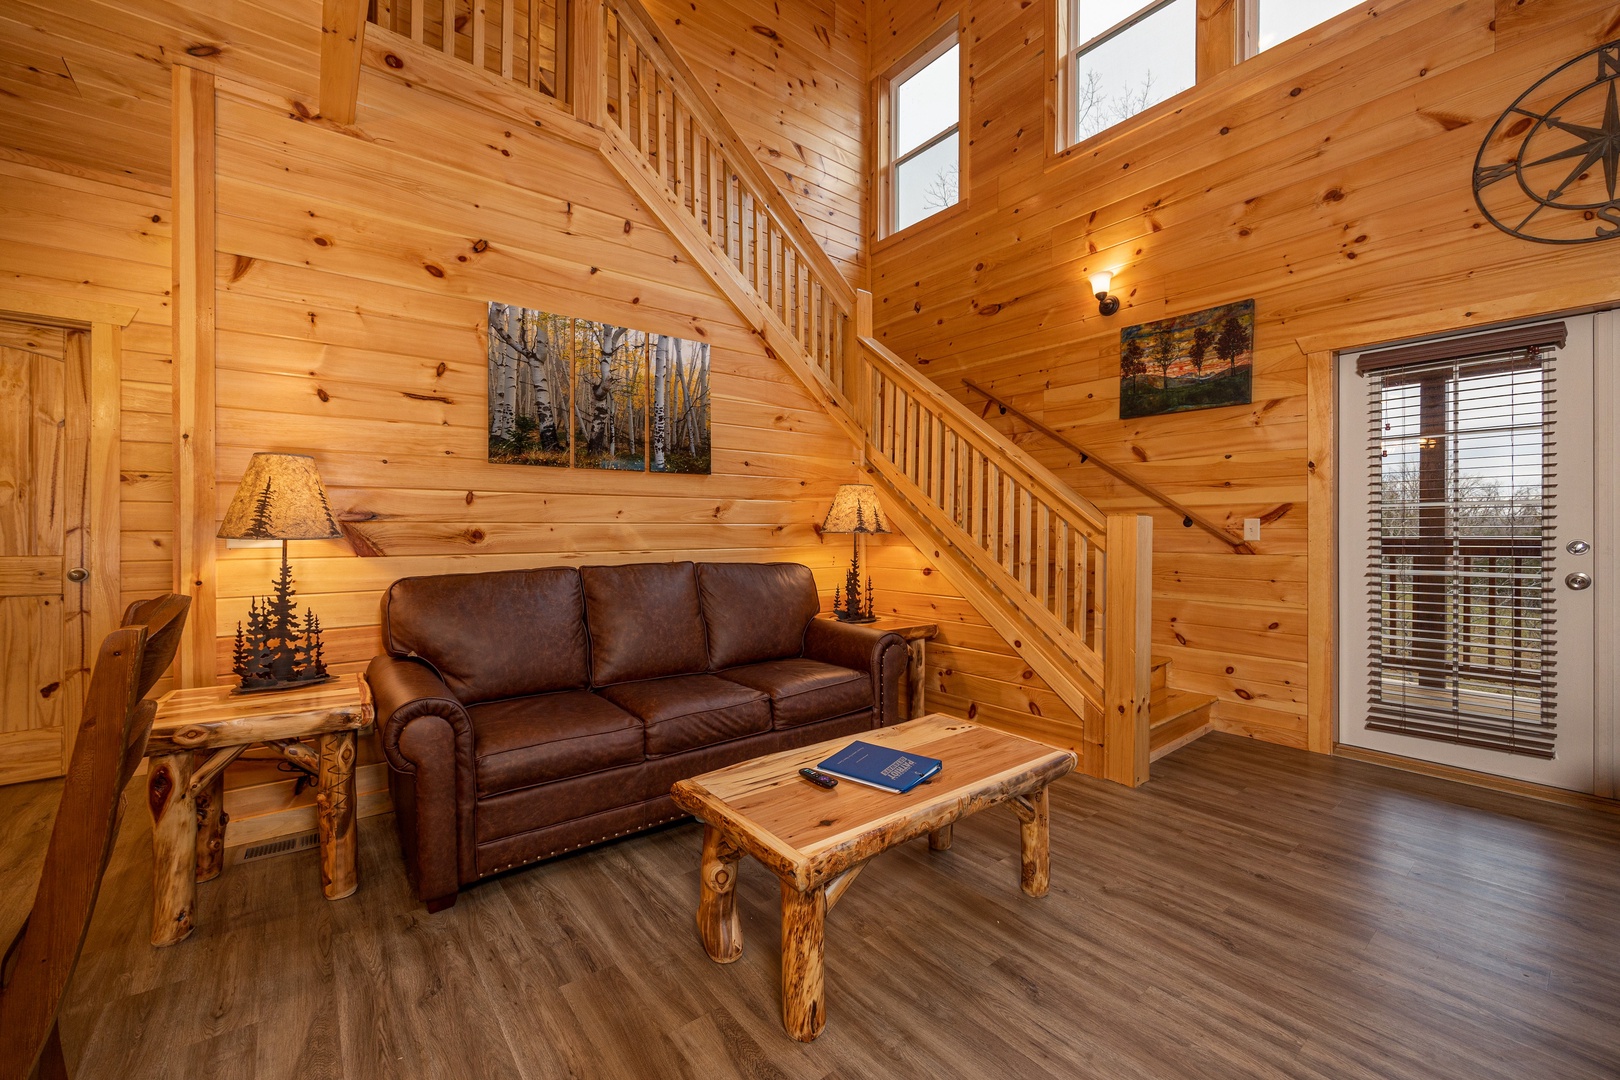 Living room seating at Mountain Pool & Paradise, a 3 bedroom cabin rental located in Pigeon Forge